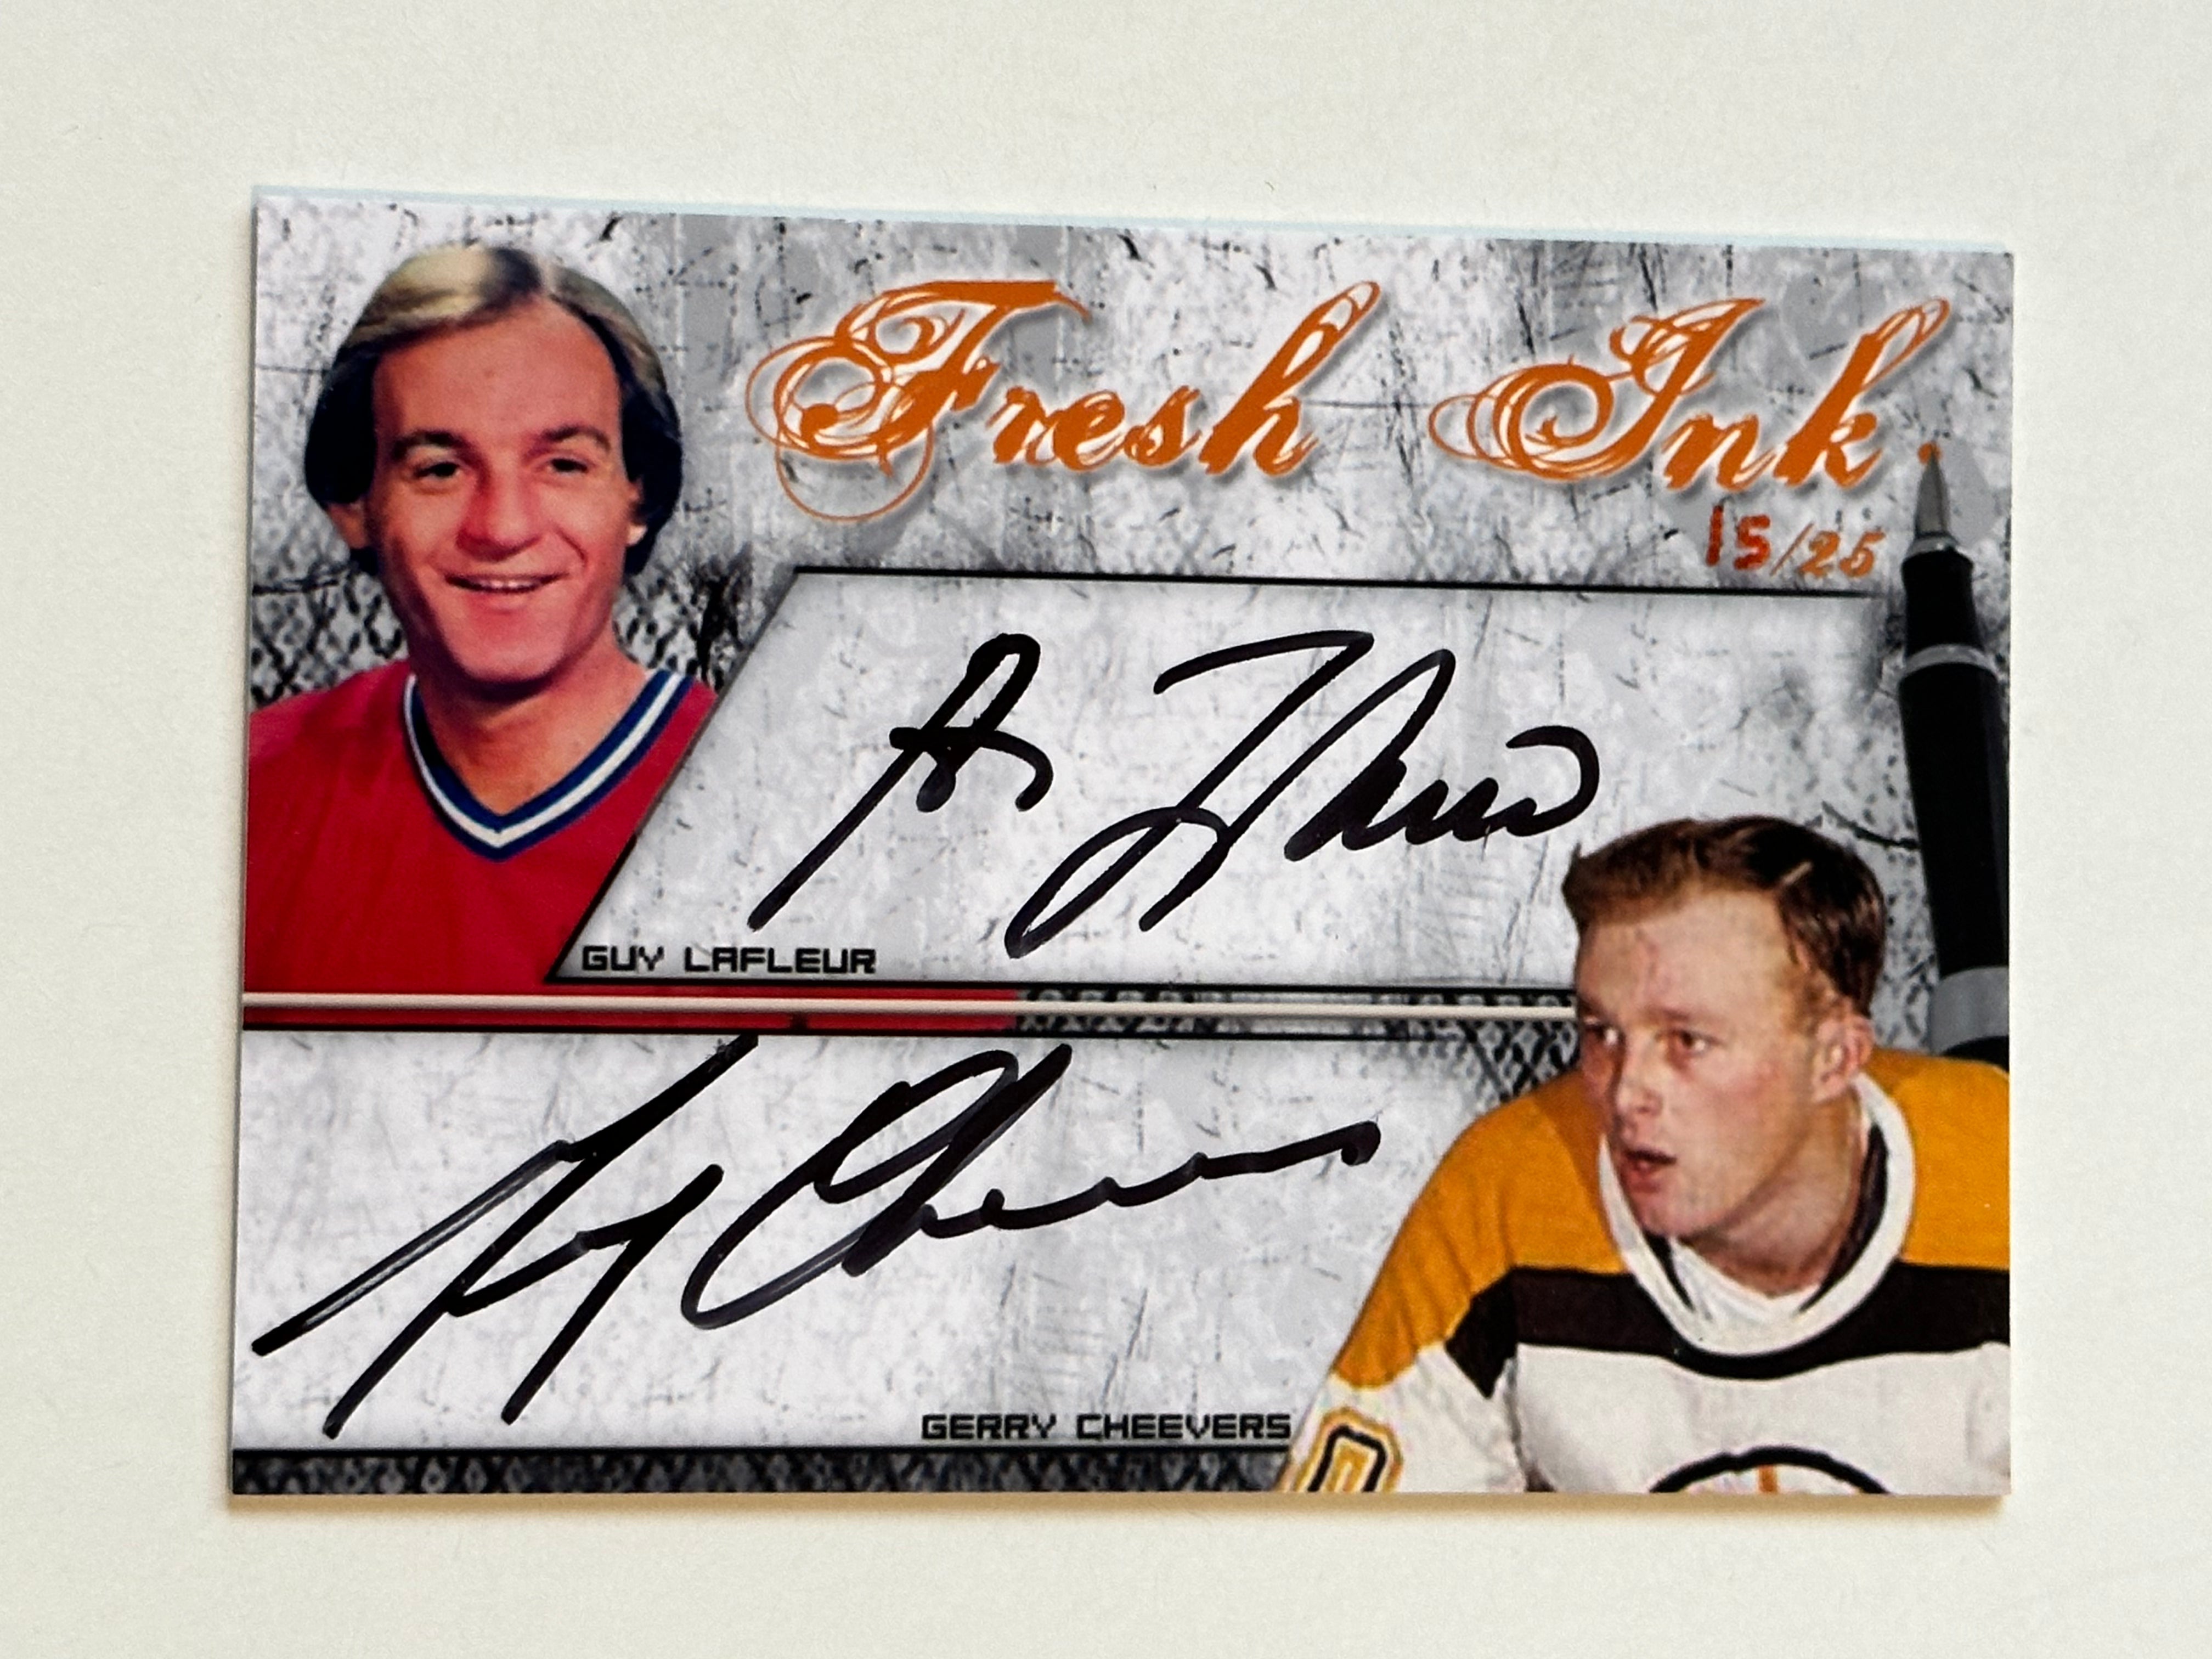 Guy LaFleur and Gerry Cheevers rare double autograph numbered hockey legends card 15/25